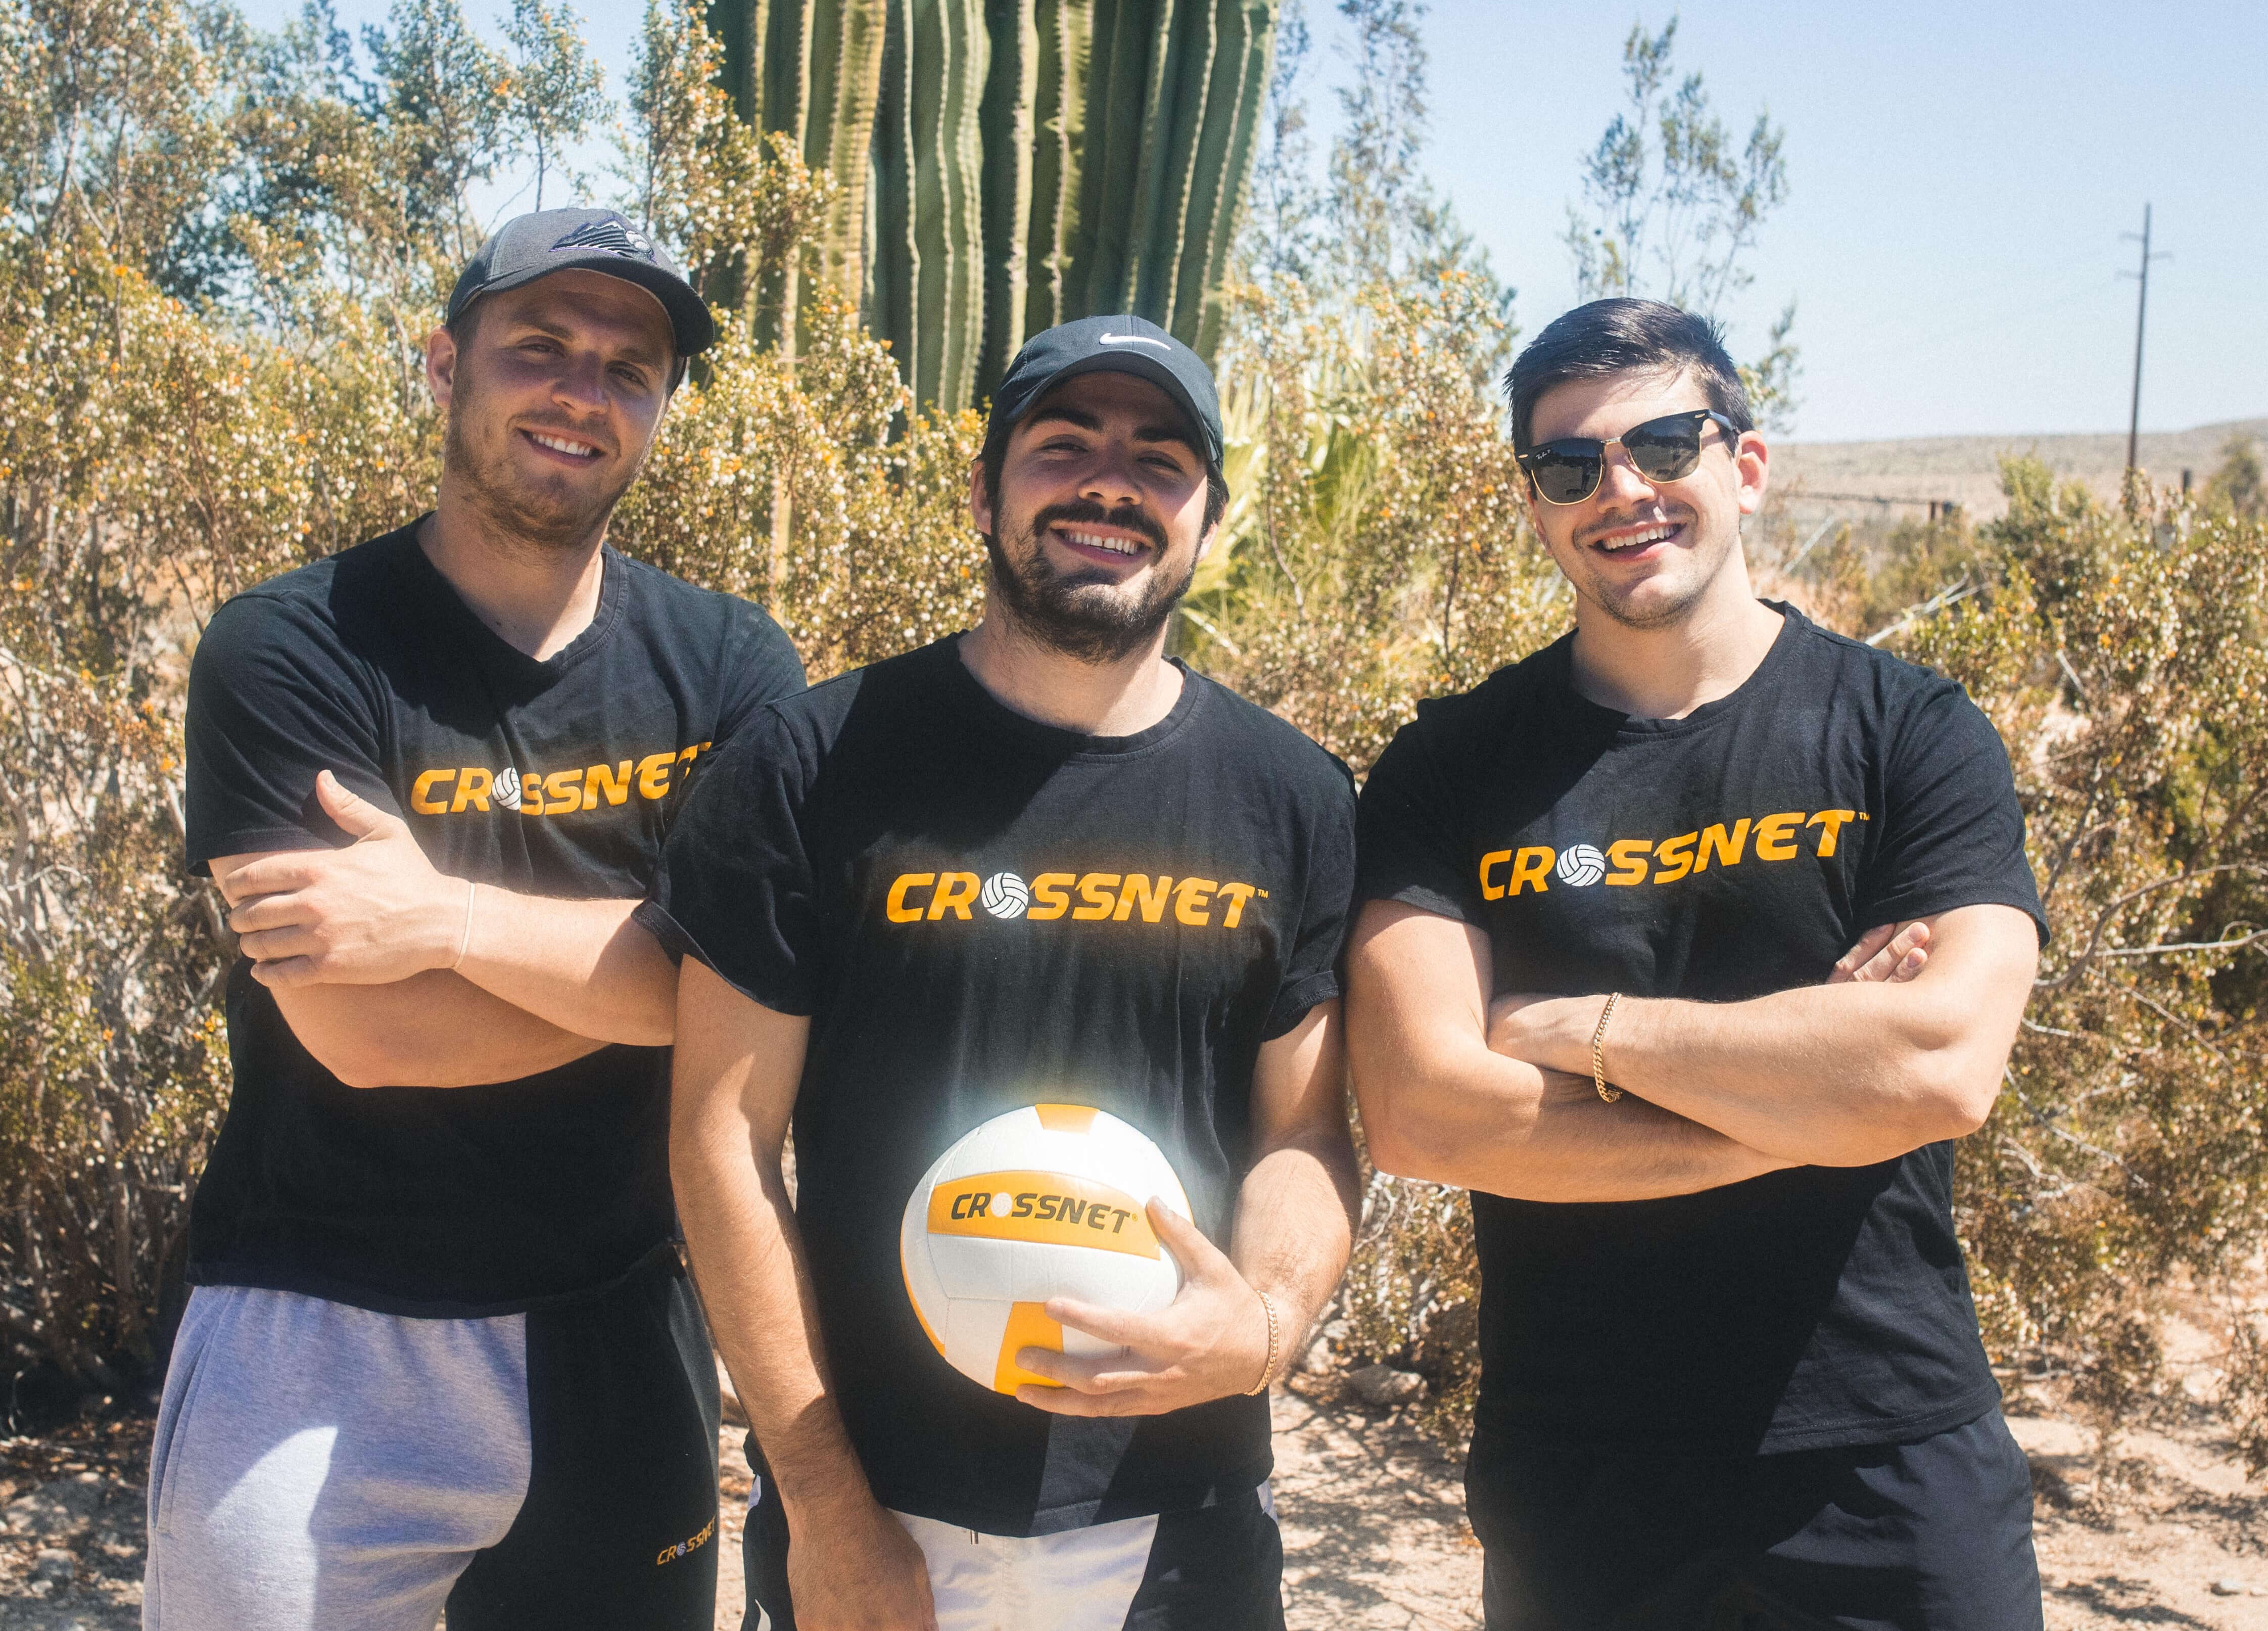 The three founders of CROSSNET standing together with a volleyball